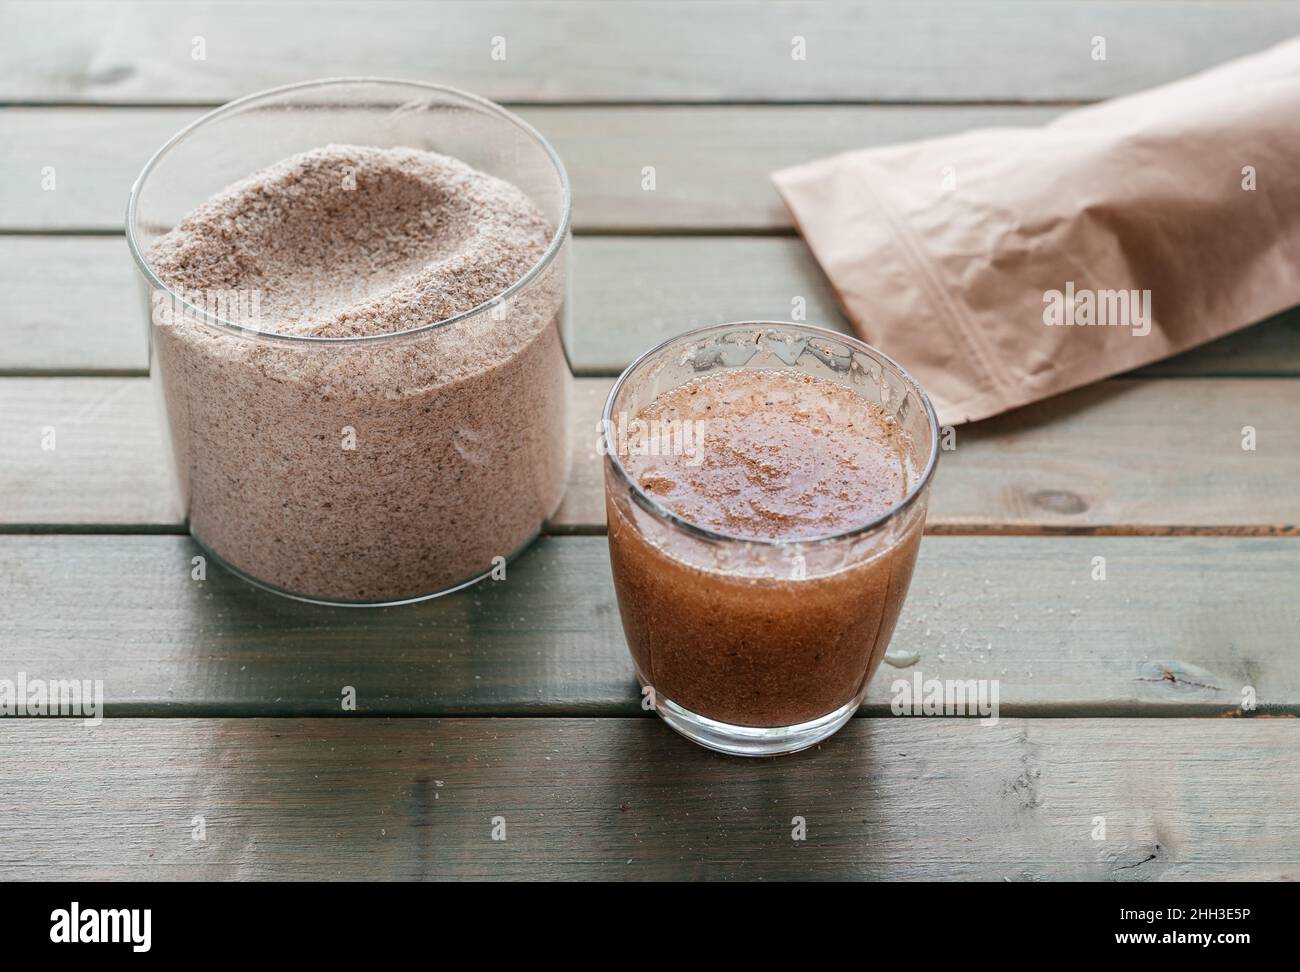 A glass of water soluble psyllium husk dietary fiber supplement, healthy diet morning routine Stock Photo